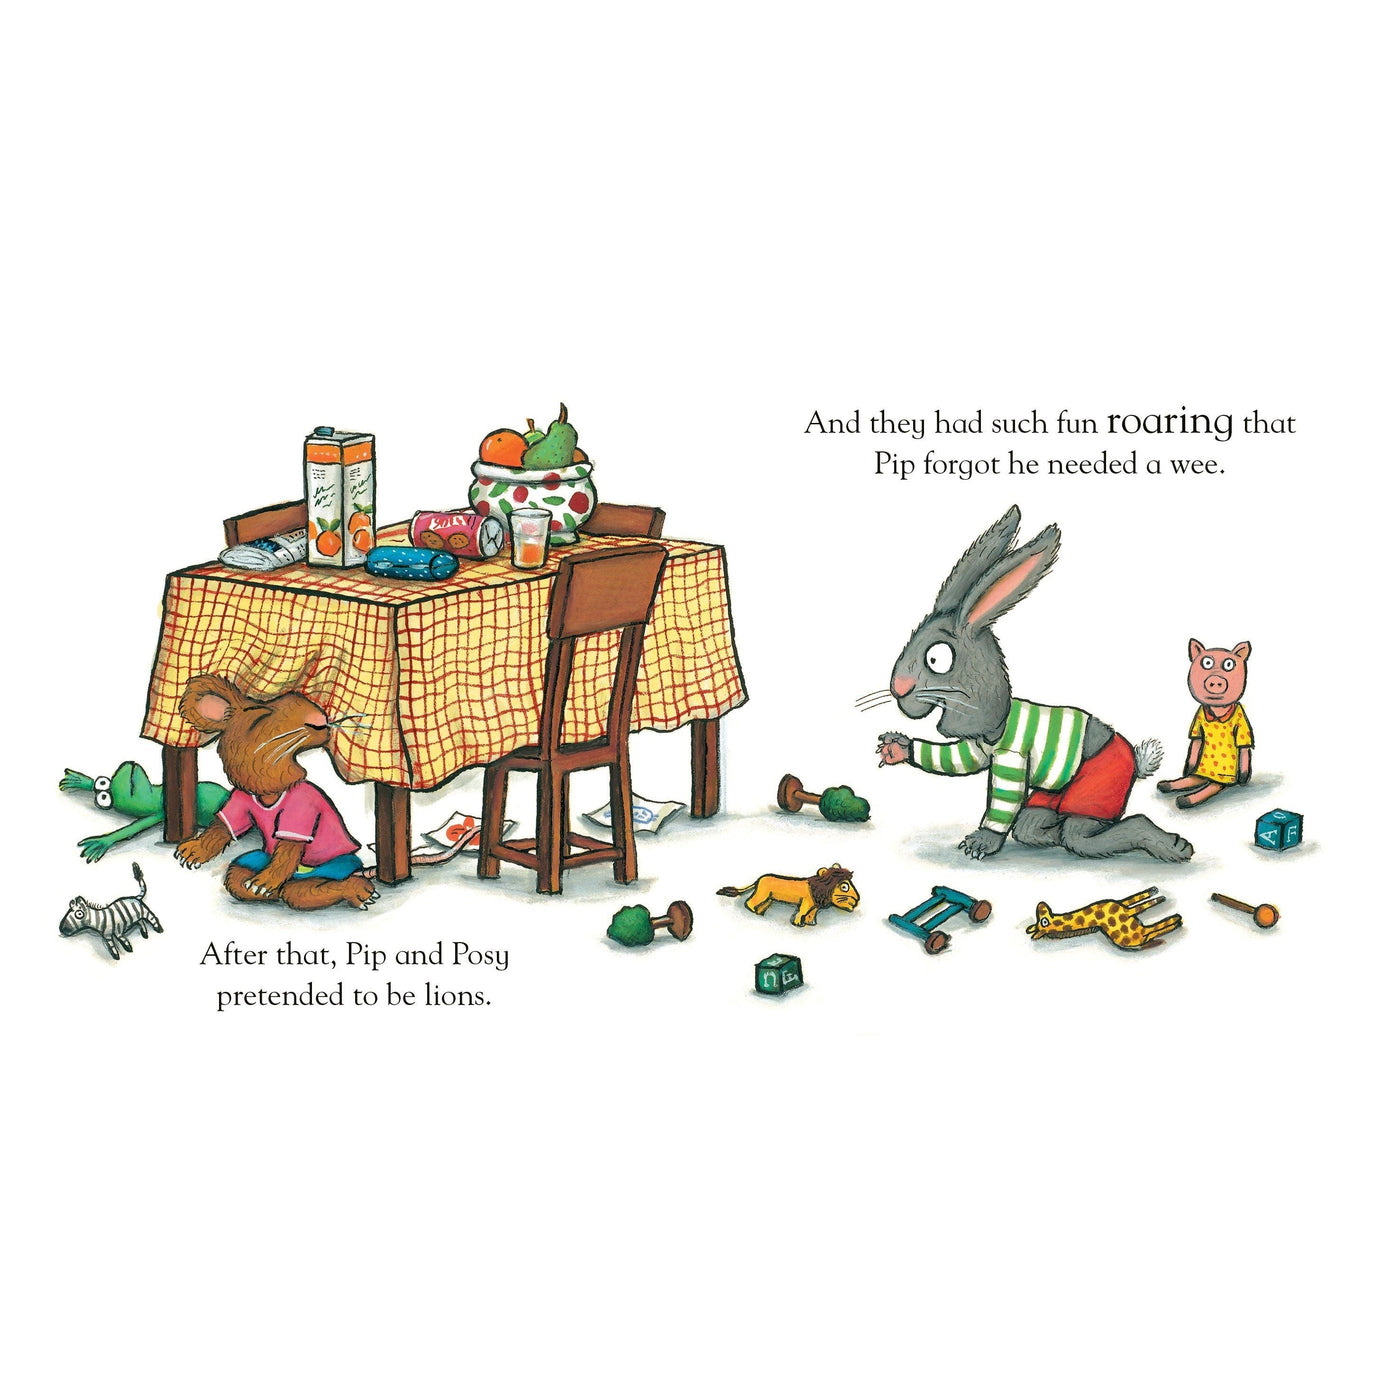 Pip And Posy: The Little Puddle - Axel Scheffler (Board Book)